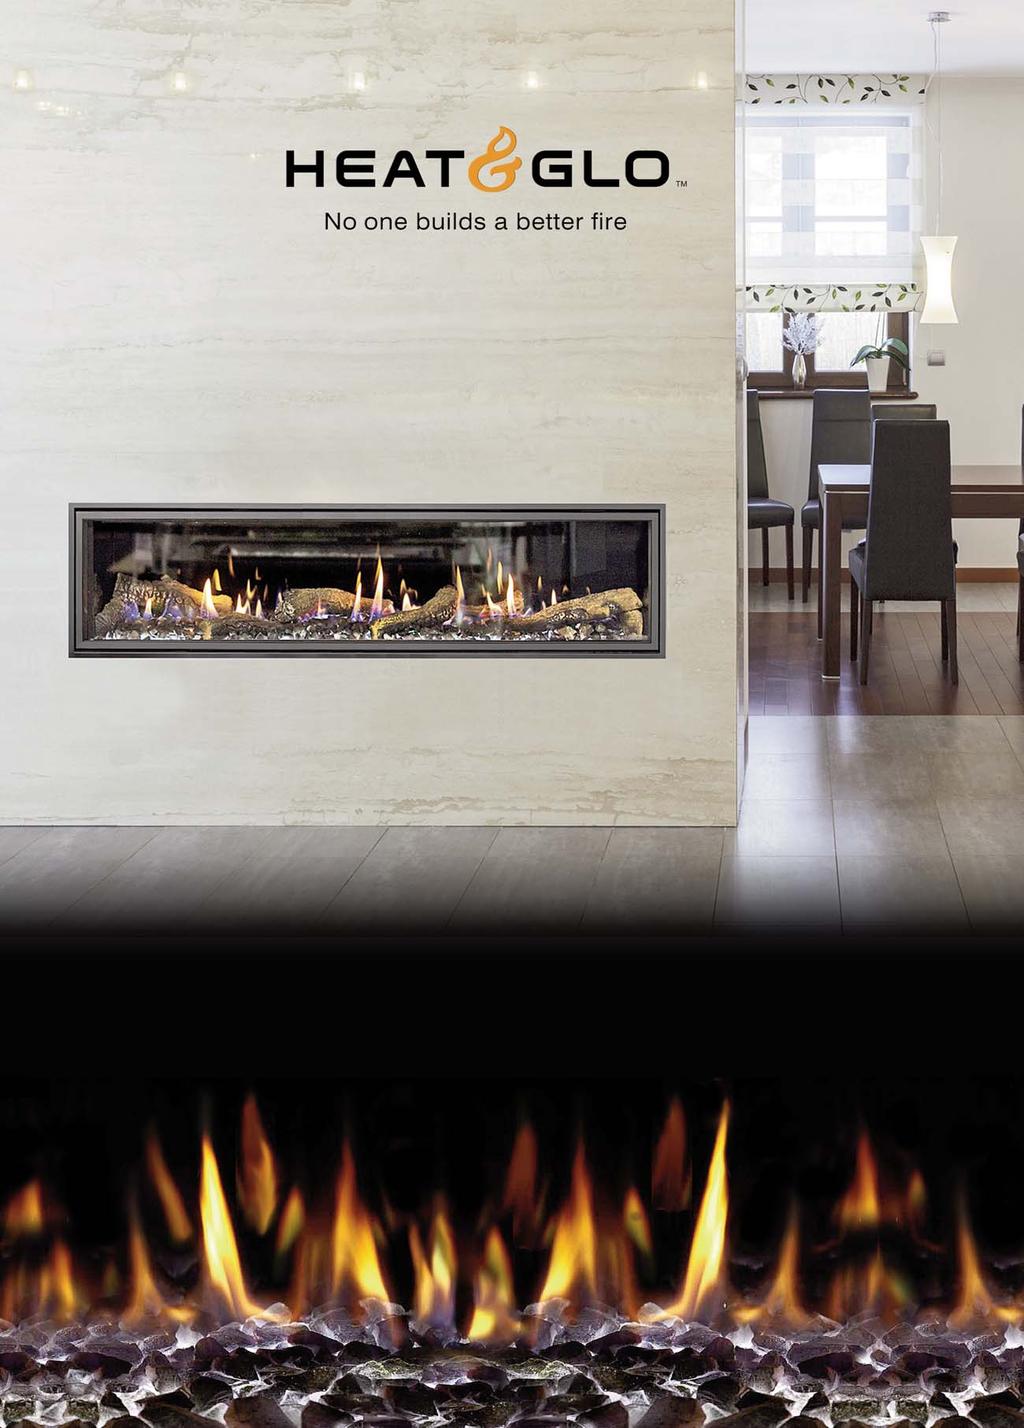 BALANCED FLUE GAS FIREPLACES Heat & Glo is driven by innovation, and is constantly aiming to maintain the credo that No one builds a better fire.